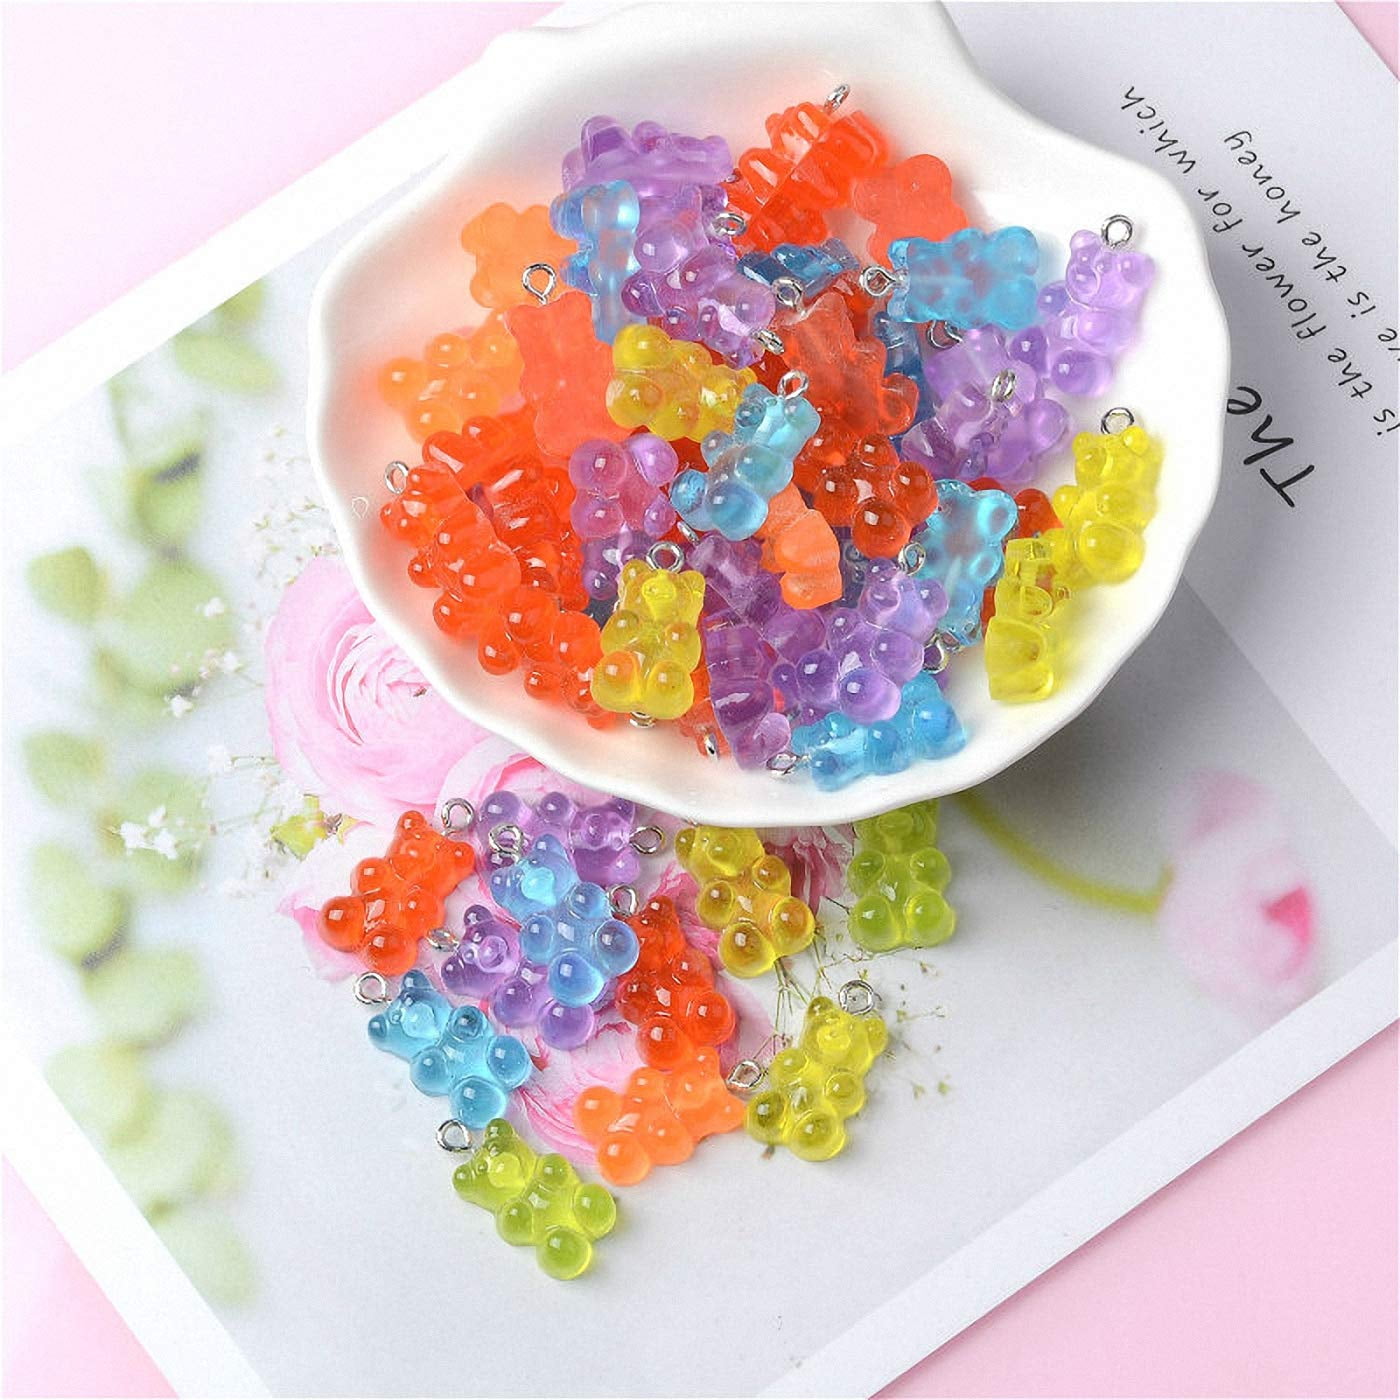 100pcs DIY crafts Fruit series mixed resin accessories diy handmade jewelry  accessories Phone case decoration sticker baby hairpin accessories- mix  styles in 100pcs